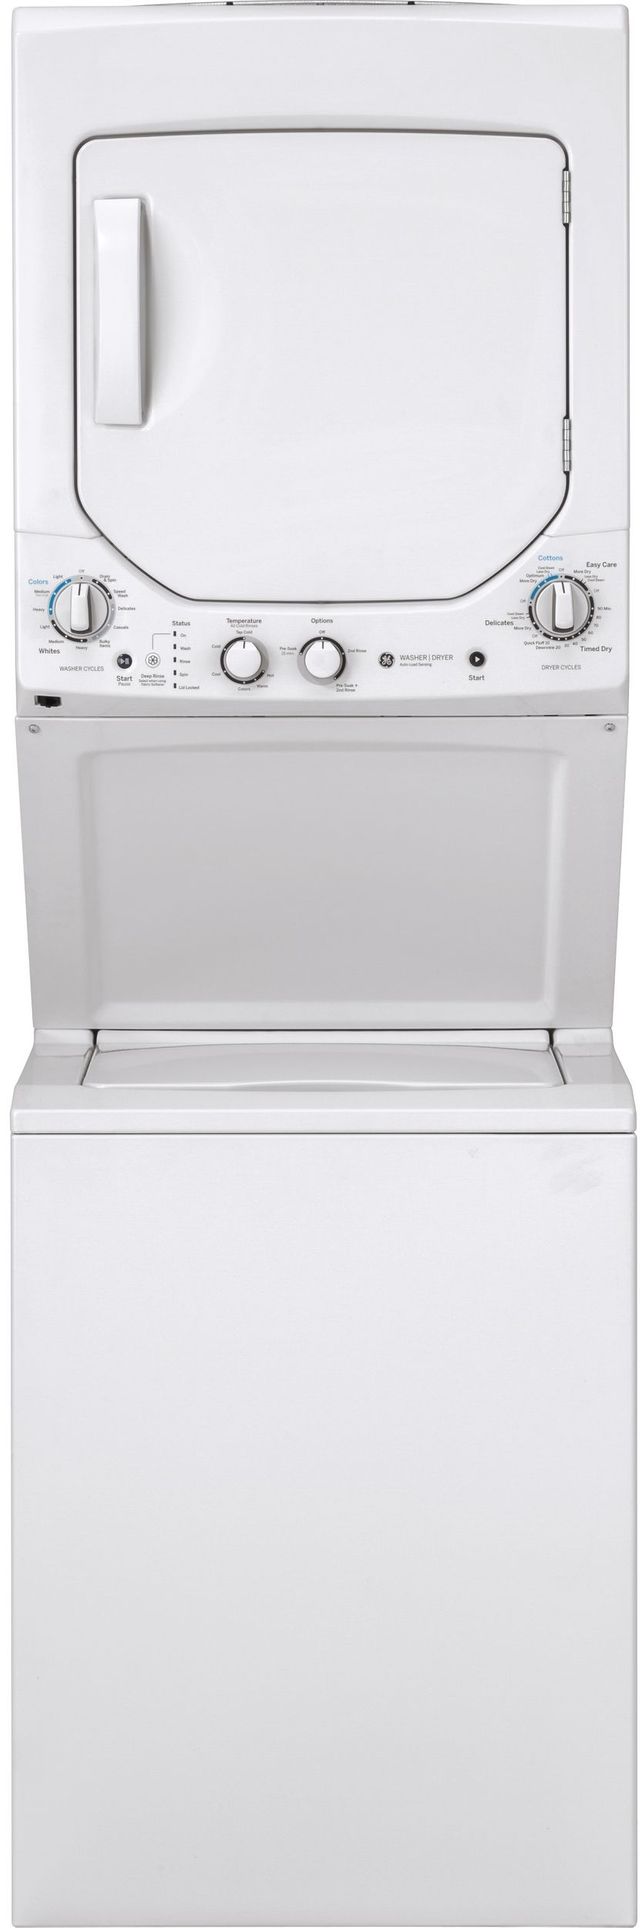 Stock photo of a white GE brand stacked washer and dryer.